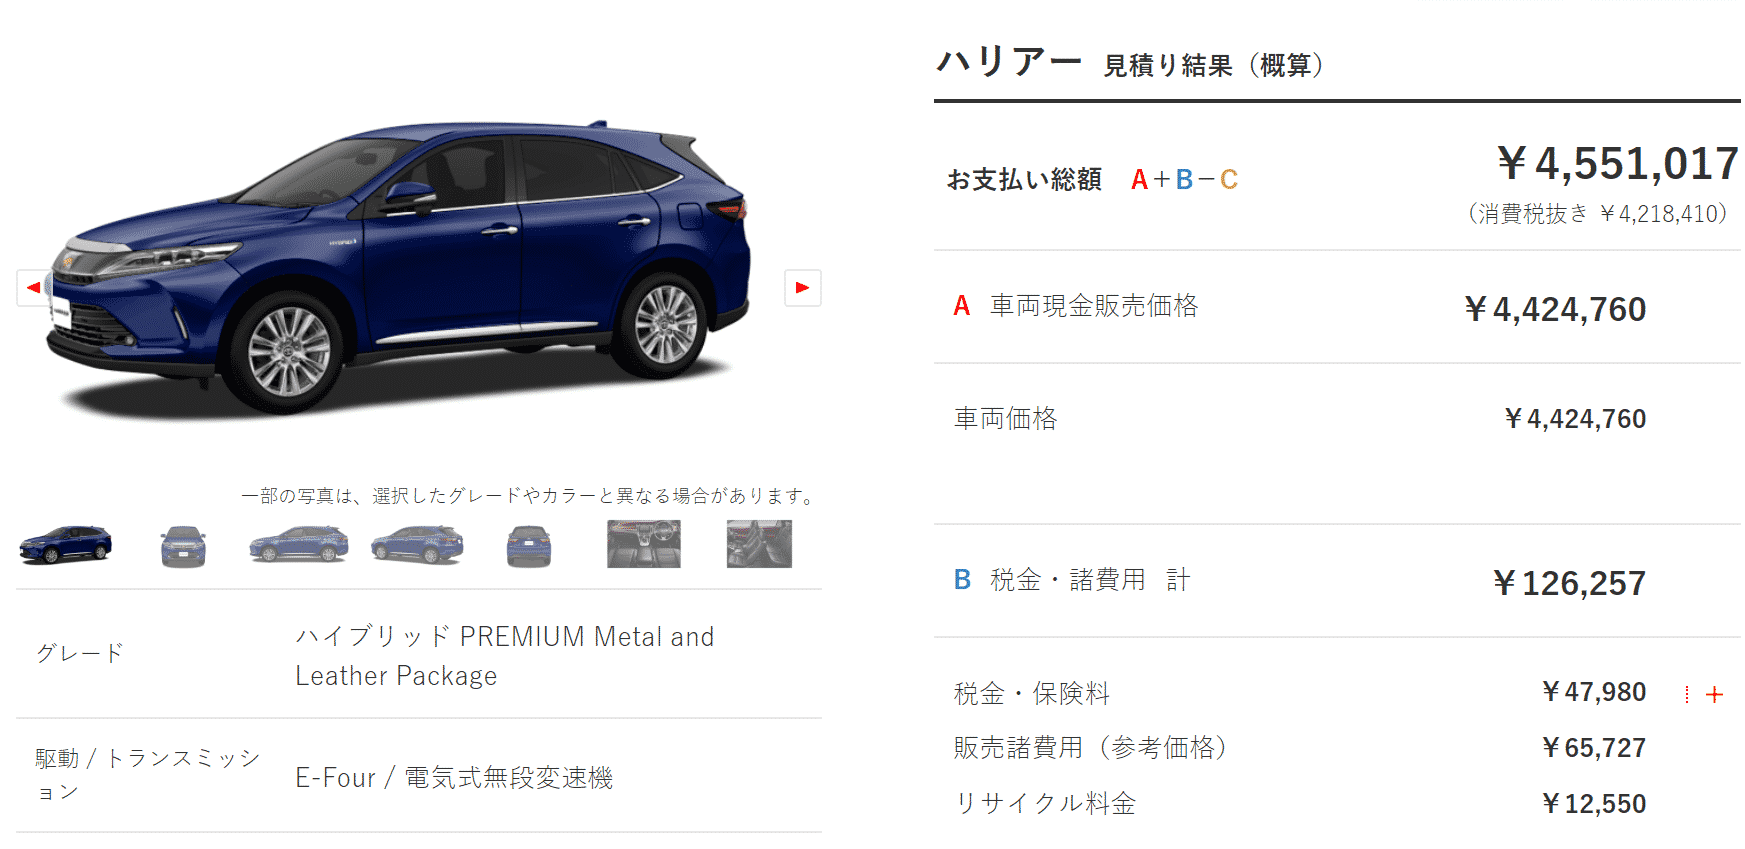 「PREMIUM “Metal and Leather Package”」ハイブリッド車の支払い総額目処の画像